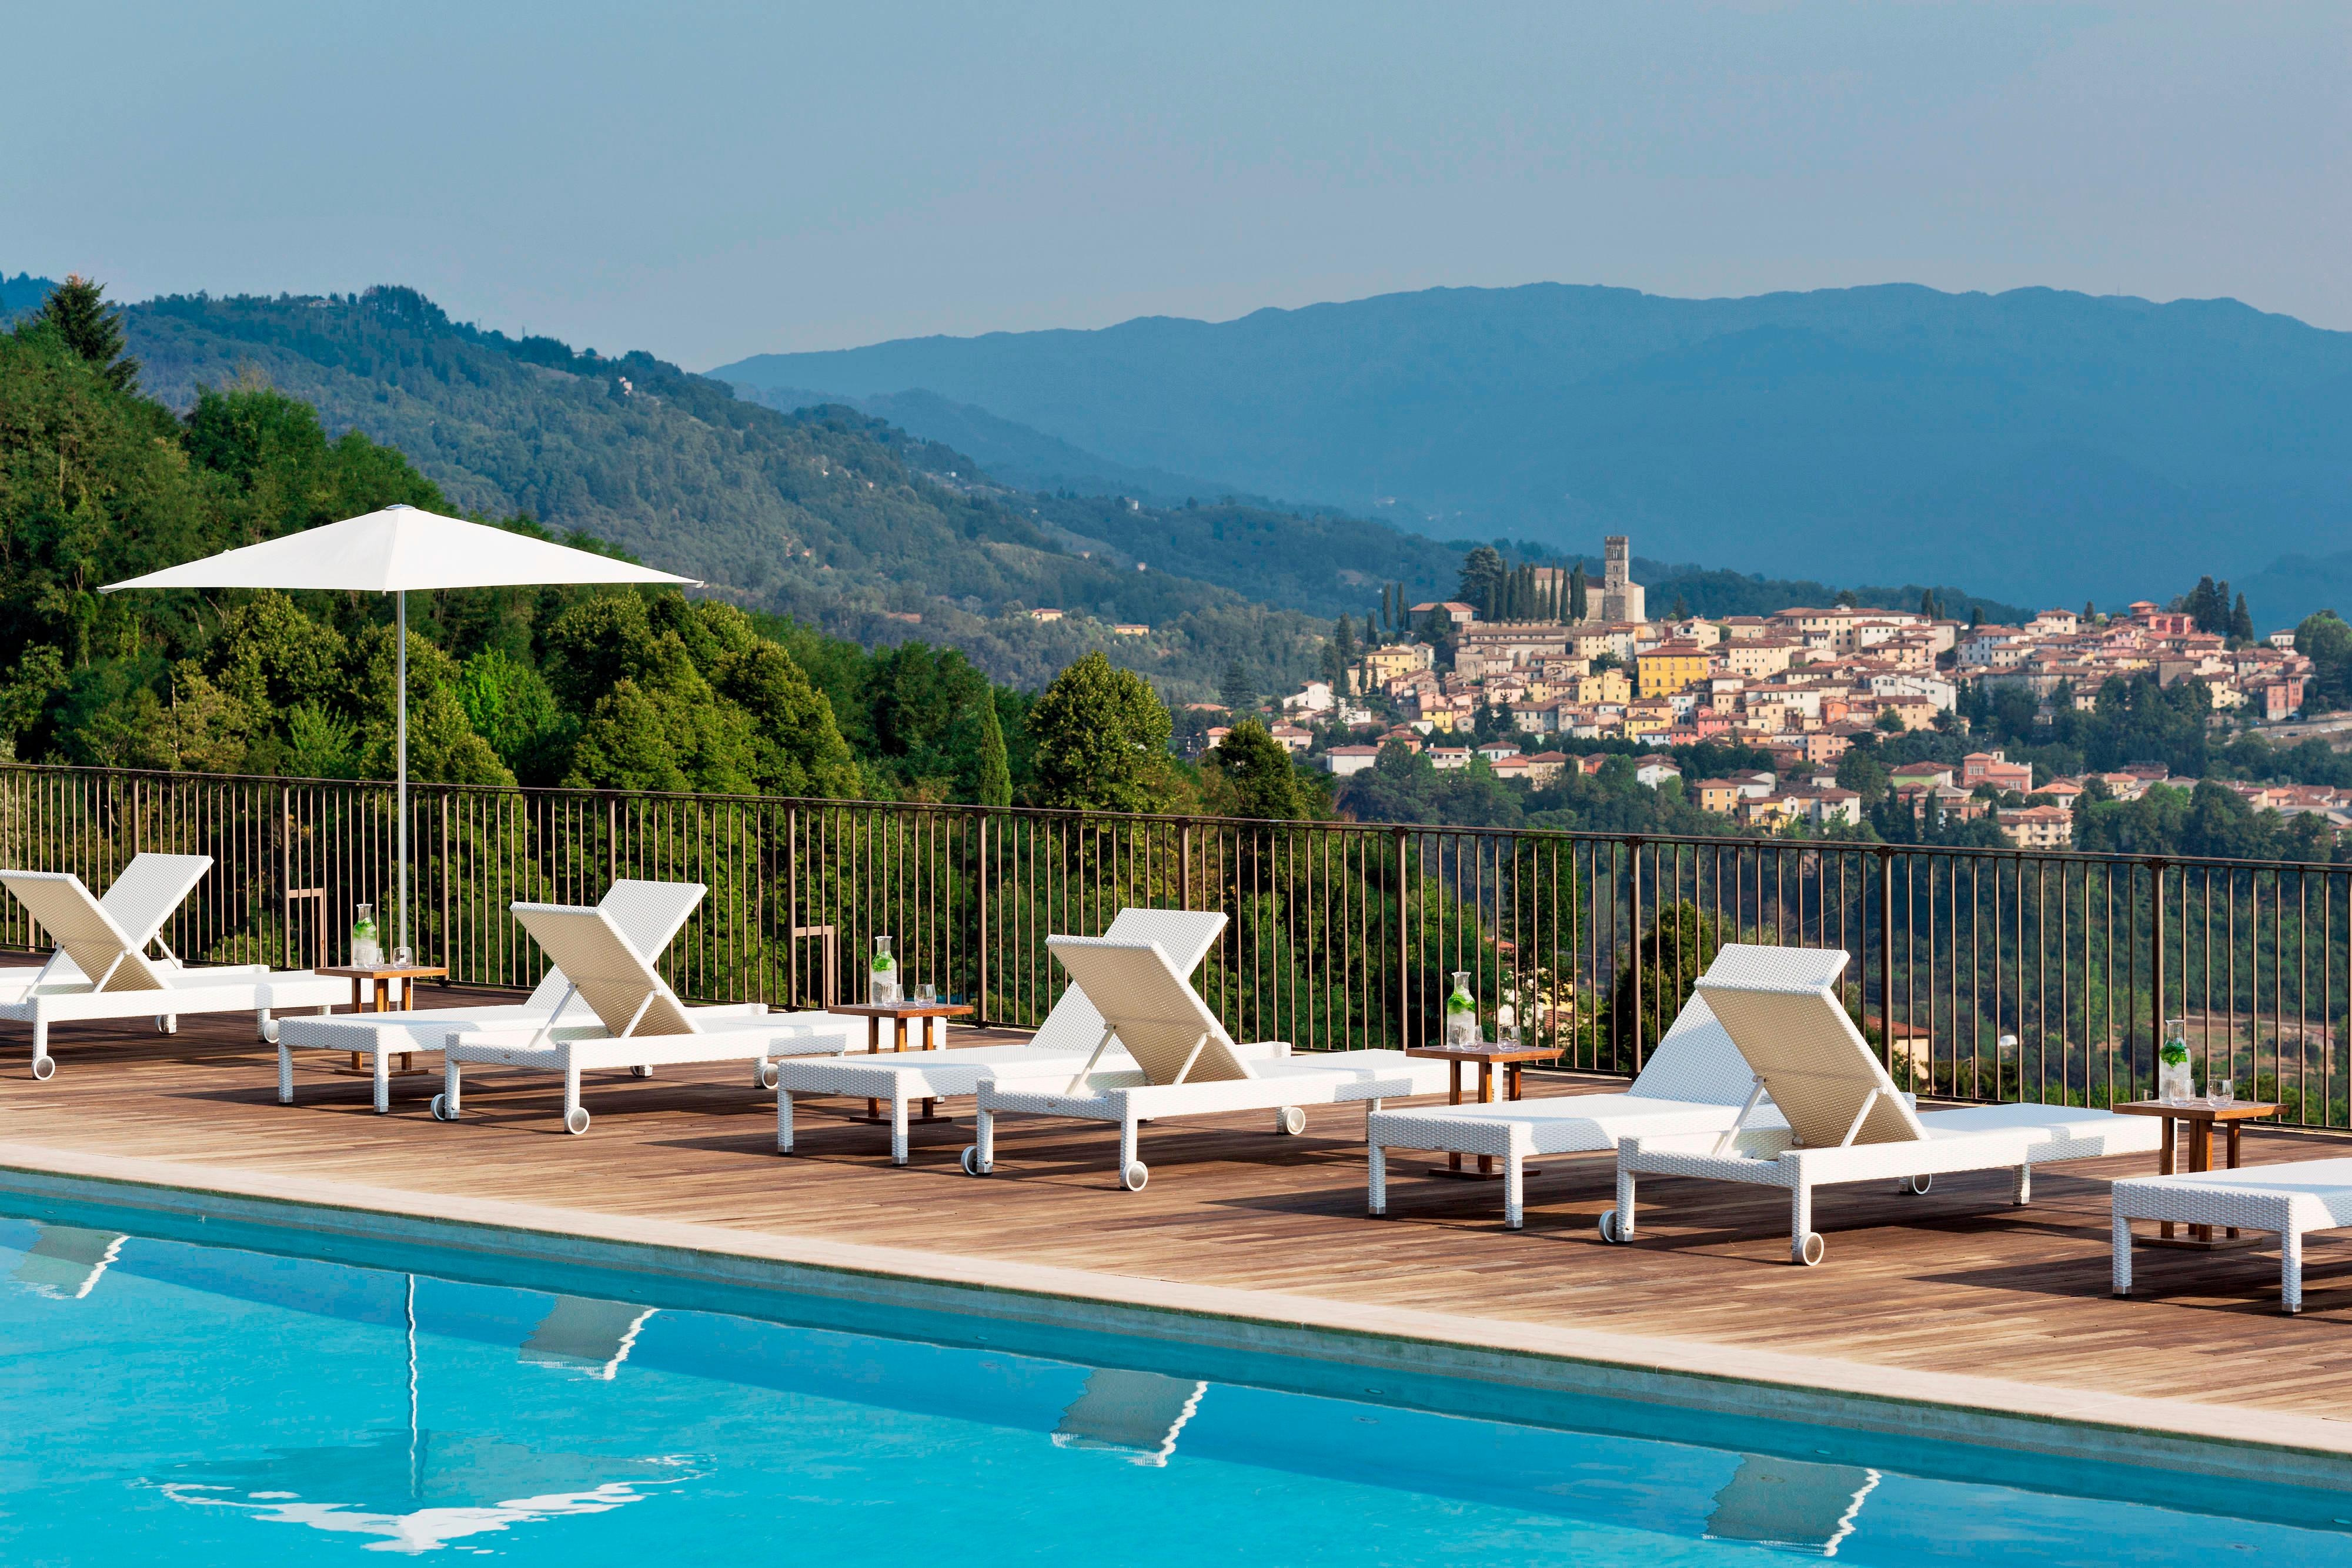 Tuscany resort with outdoor pool